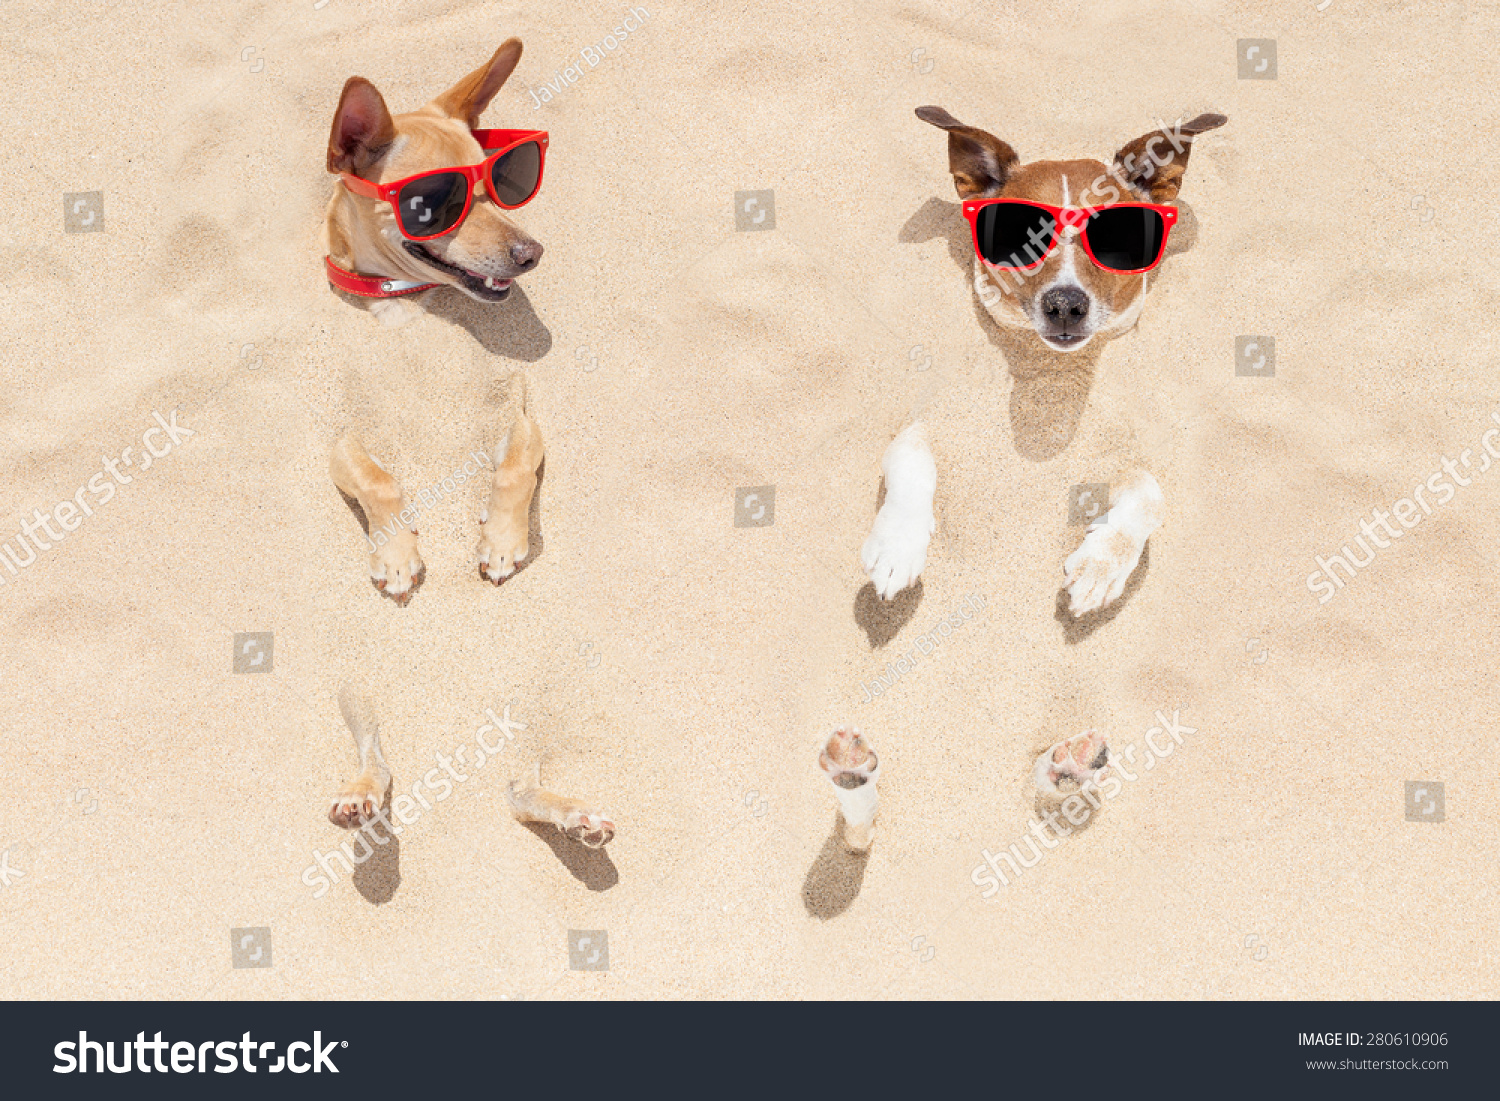 Couple Two Dogs Buried Sand Beach Stock 